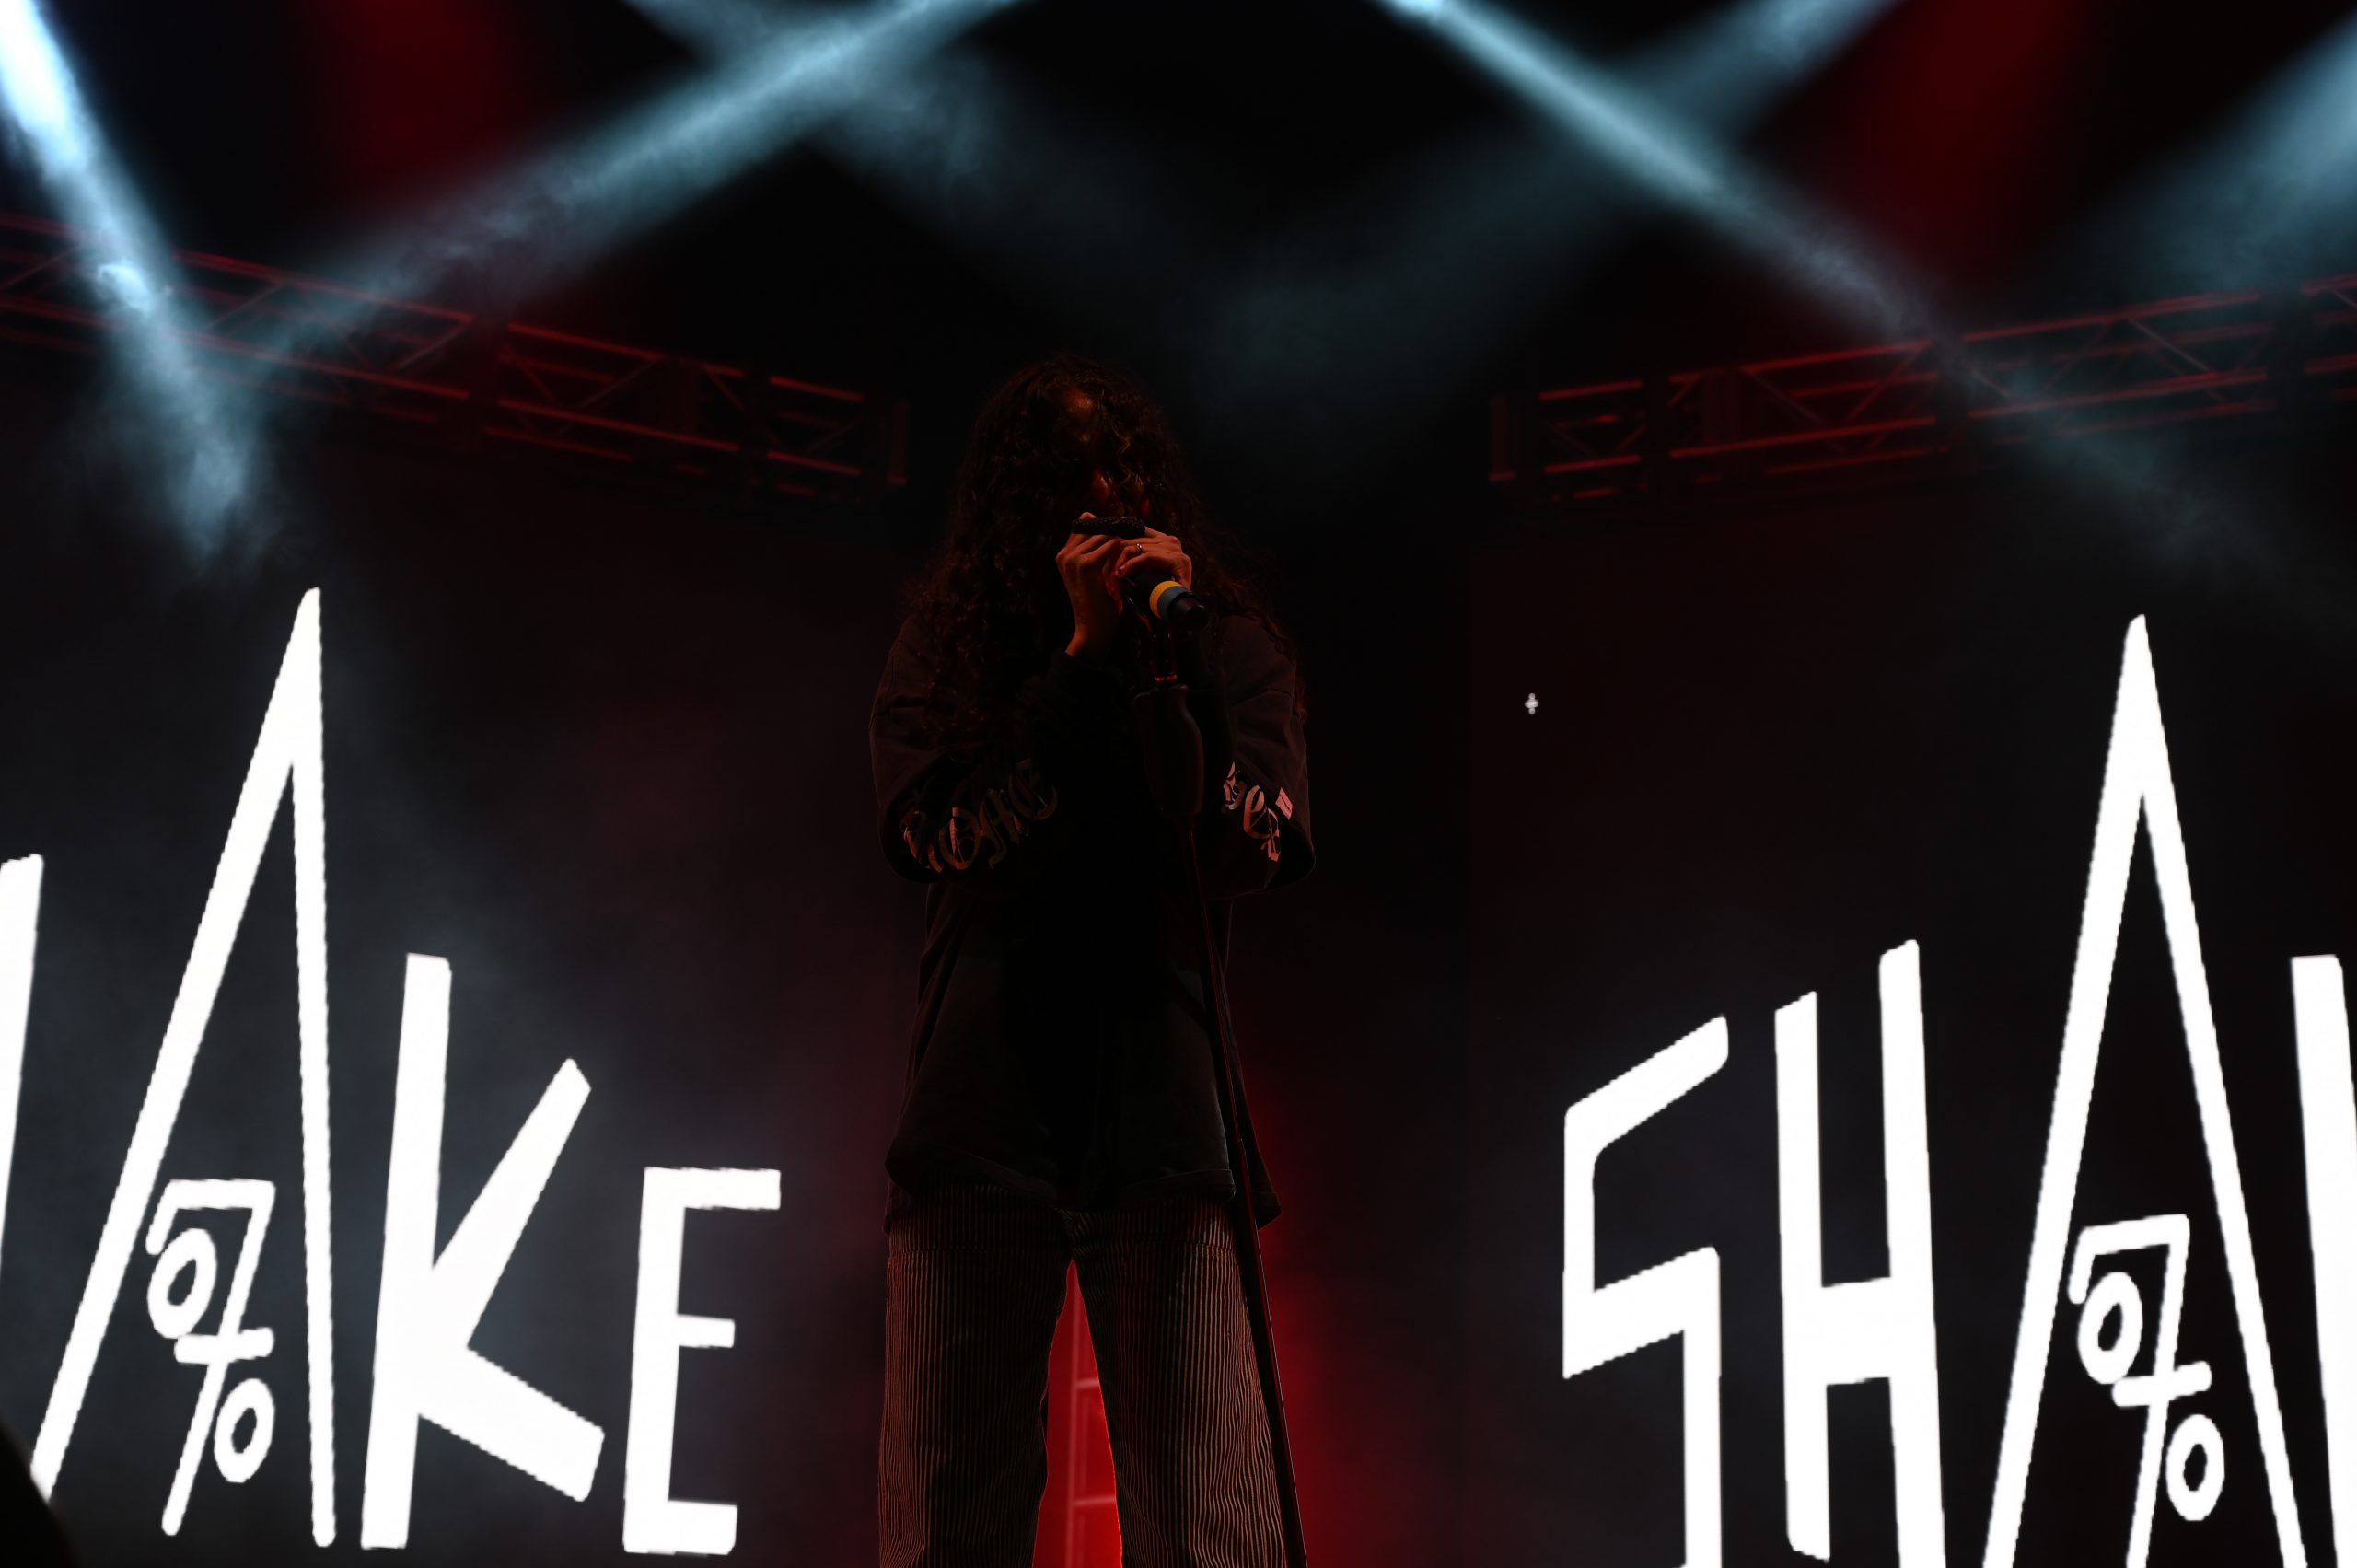 070 Shake also sang "Ghost Towns" by Kanye West, a track she's featured on. April 29, 2022. Photo by Brooke Kato